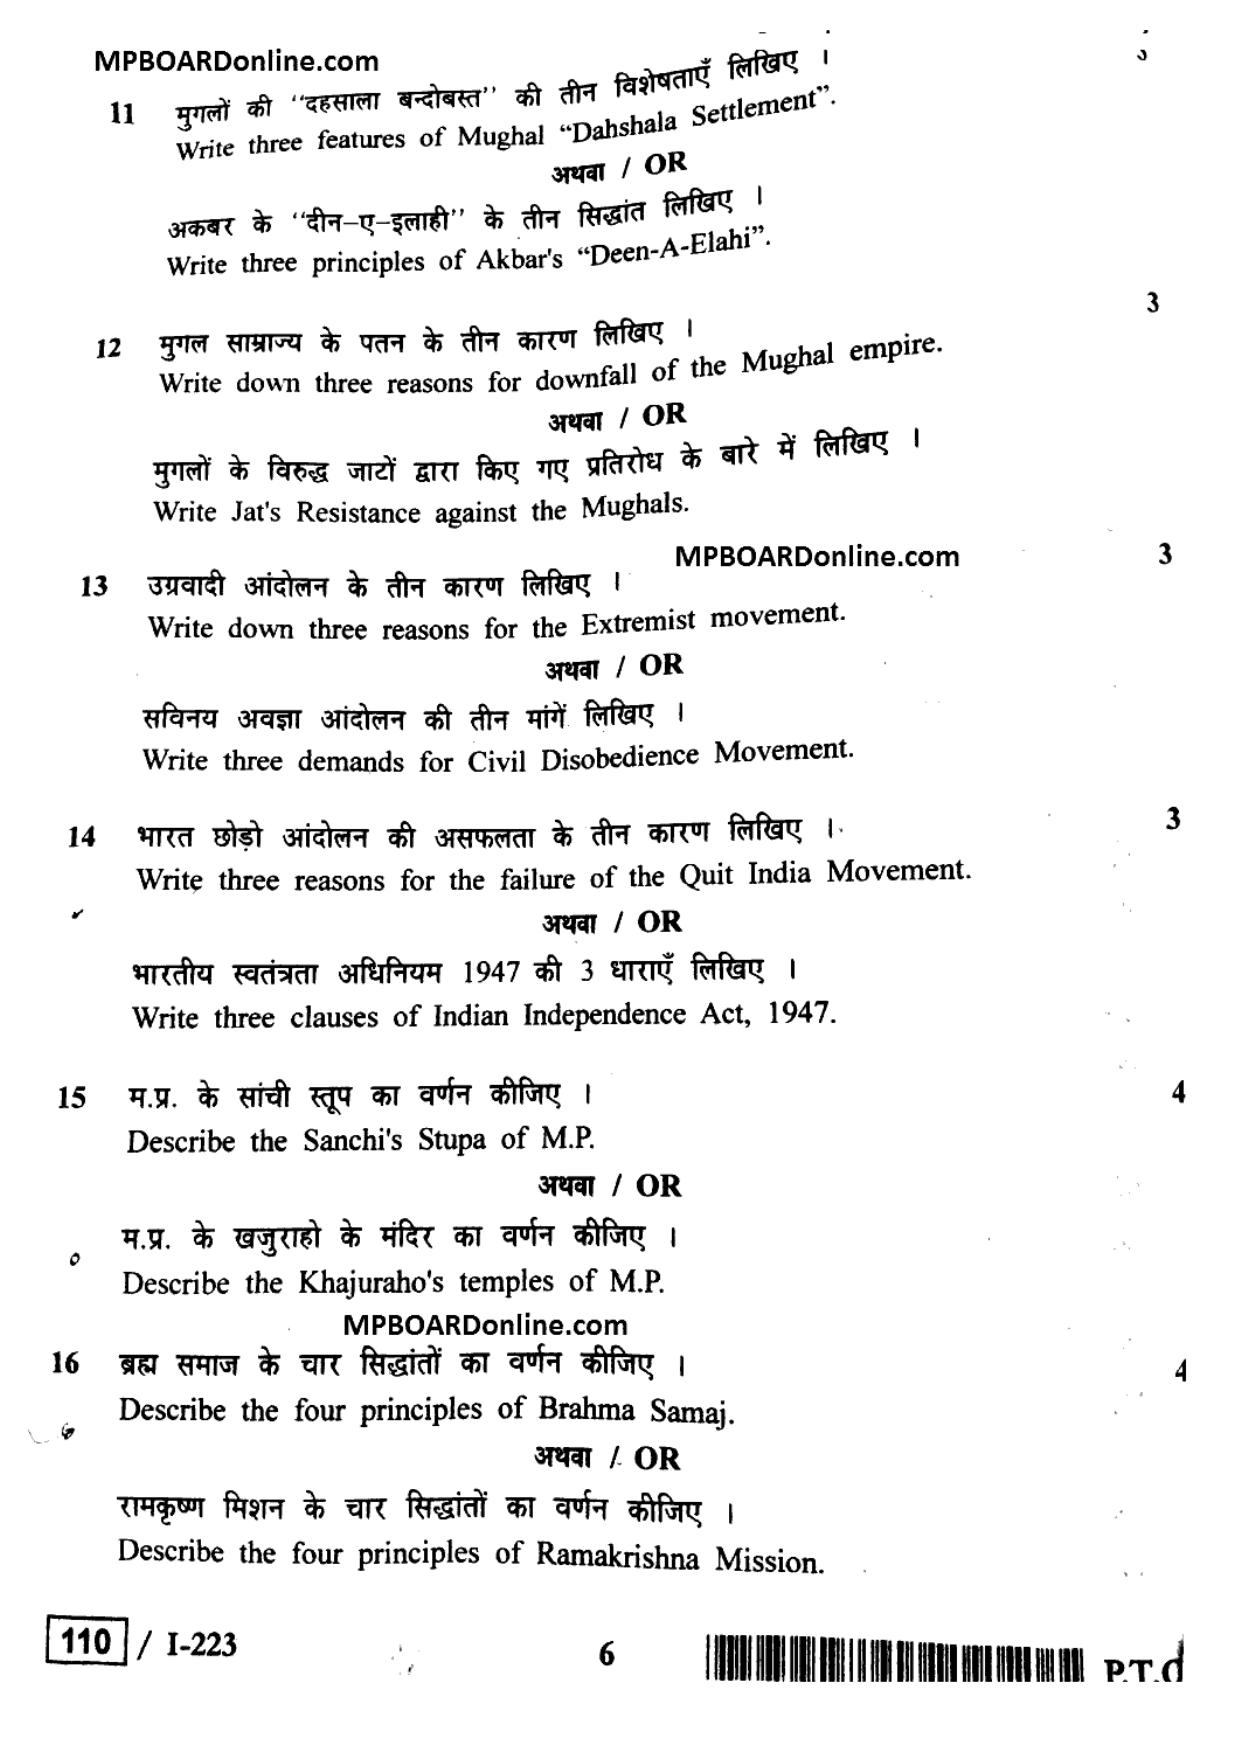 MP Board Class 12 History 2018 Question Paper - Page 6